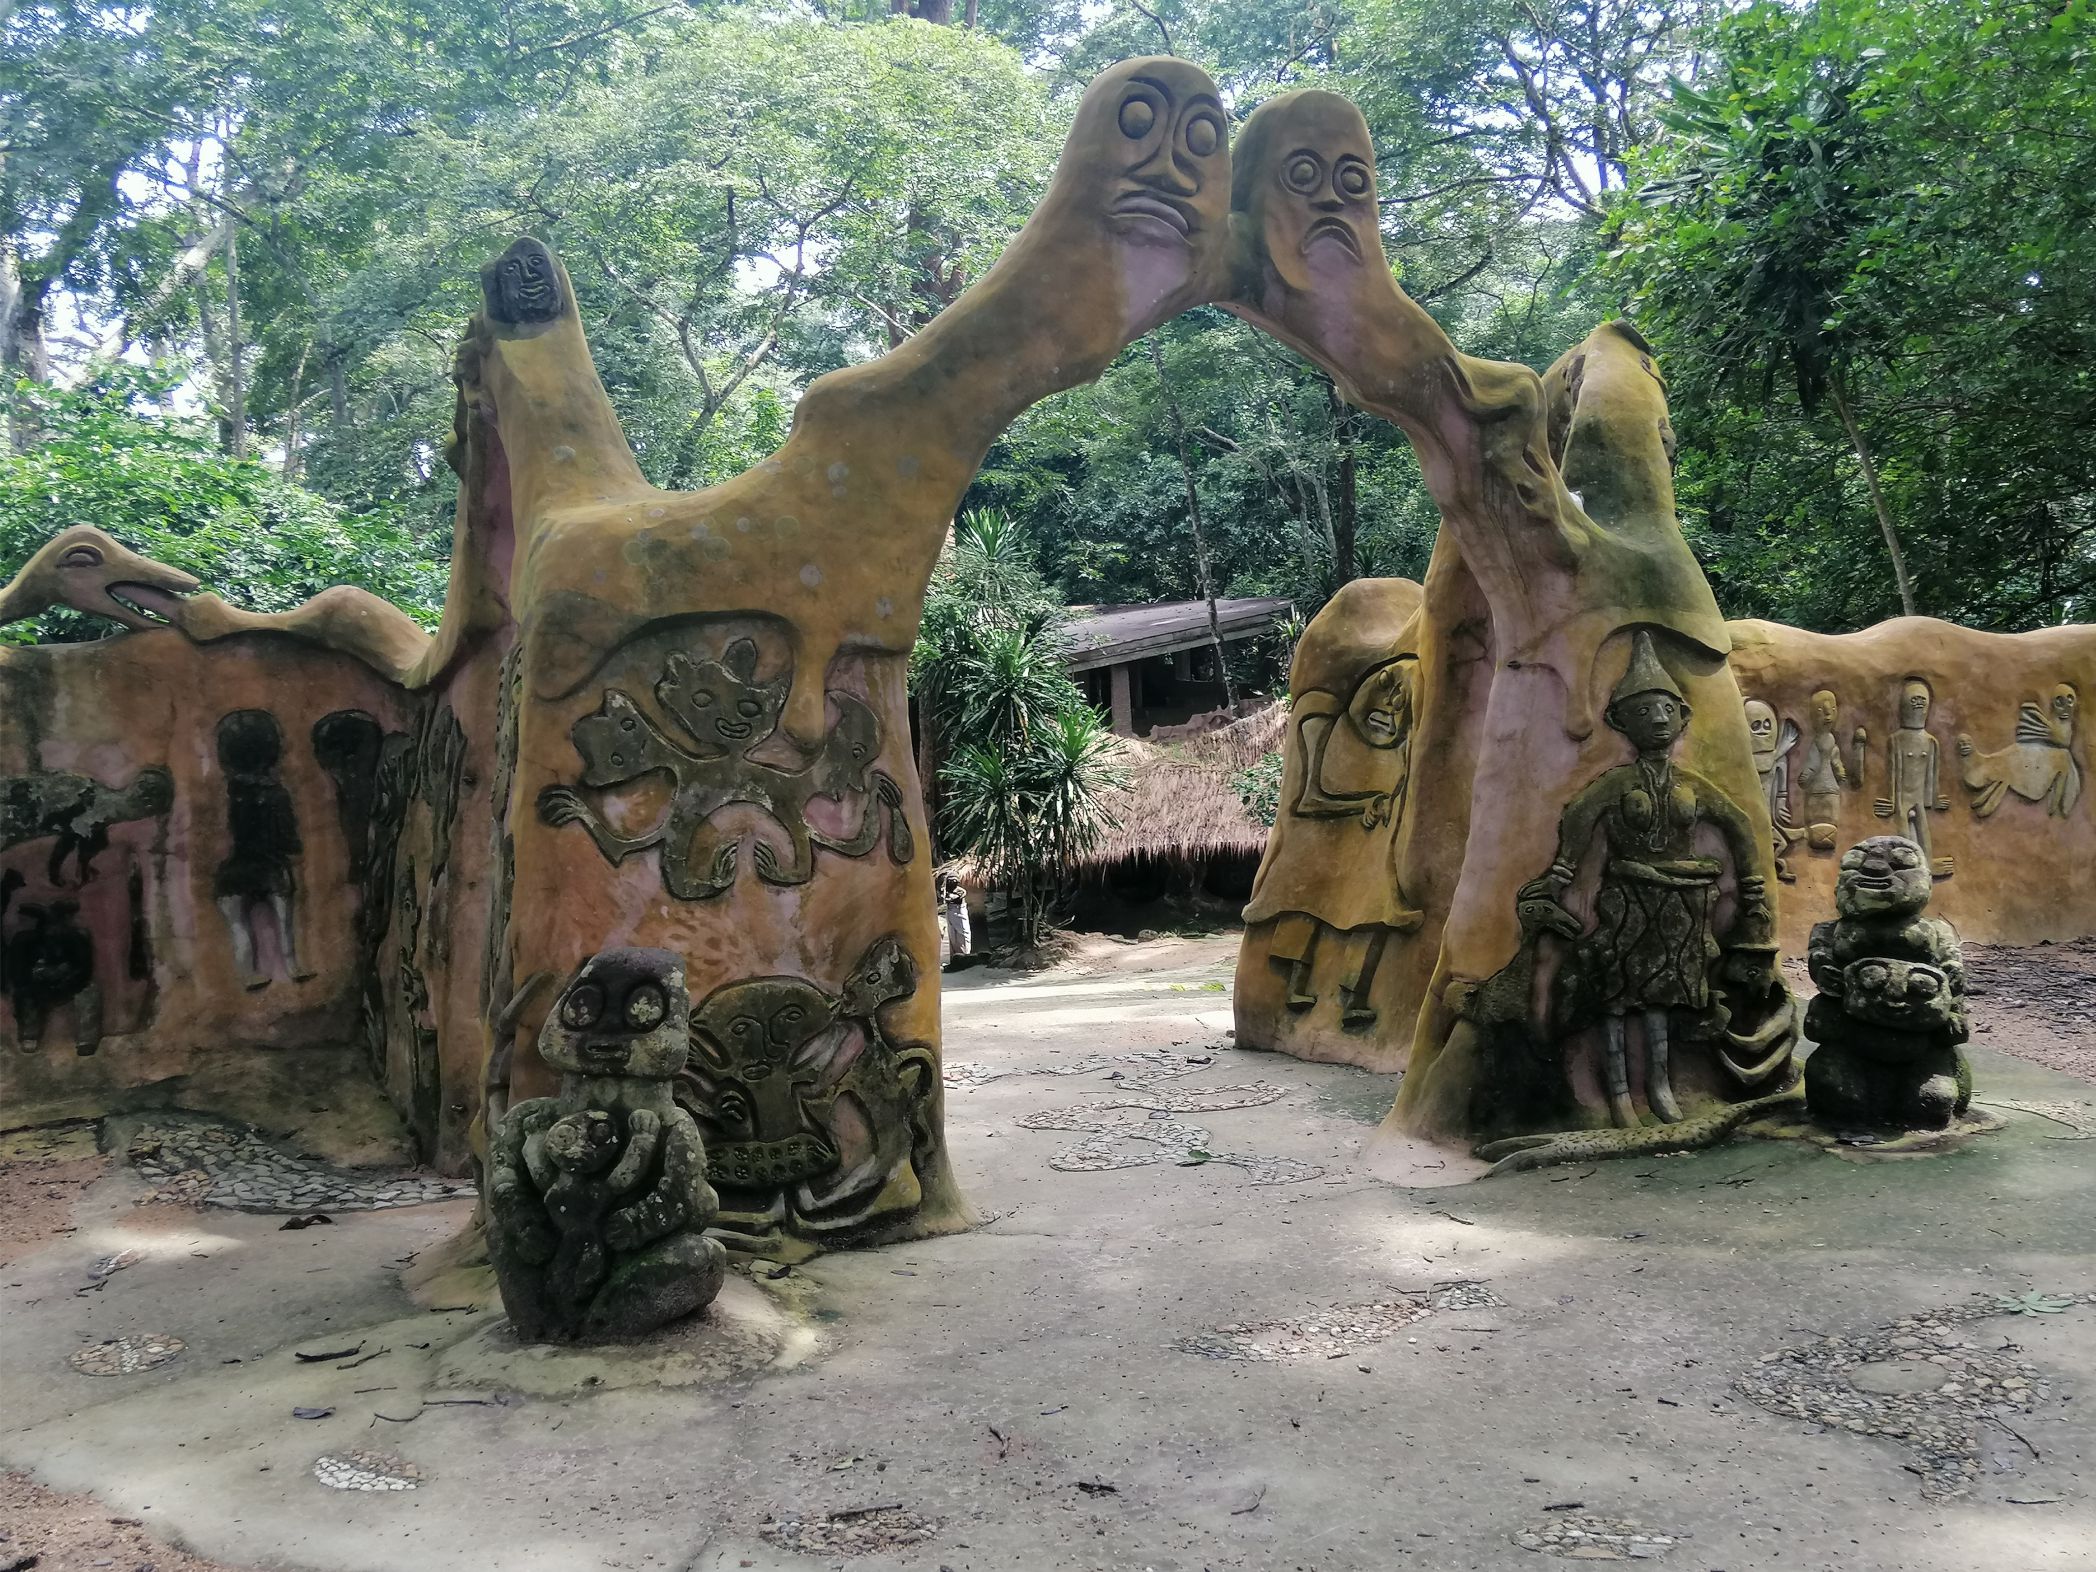 Osun Osogbo Sacred Grove National Commission for Museums and Monuments